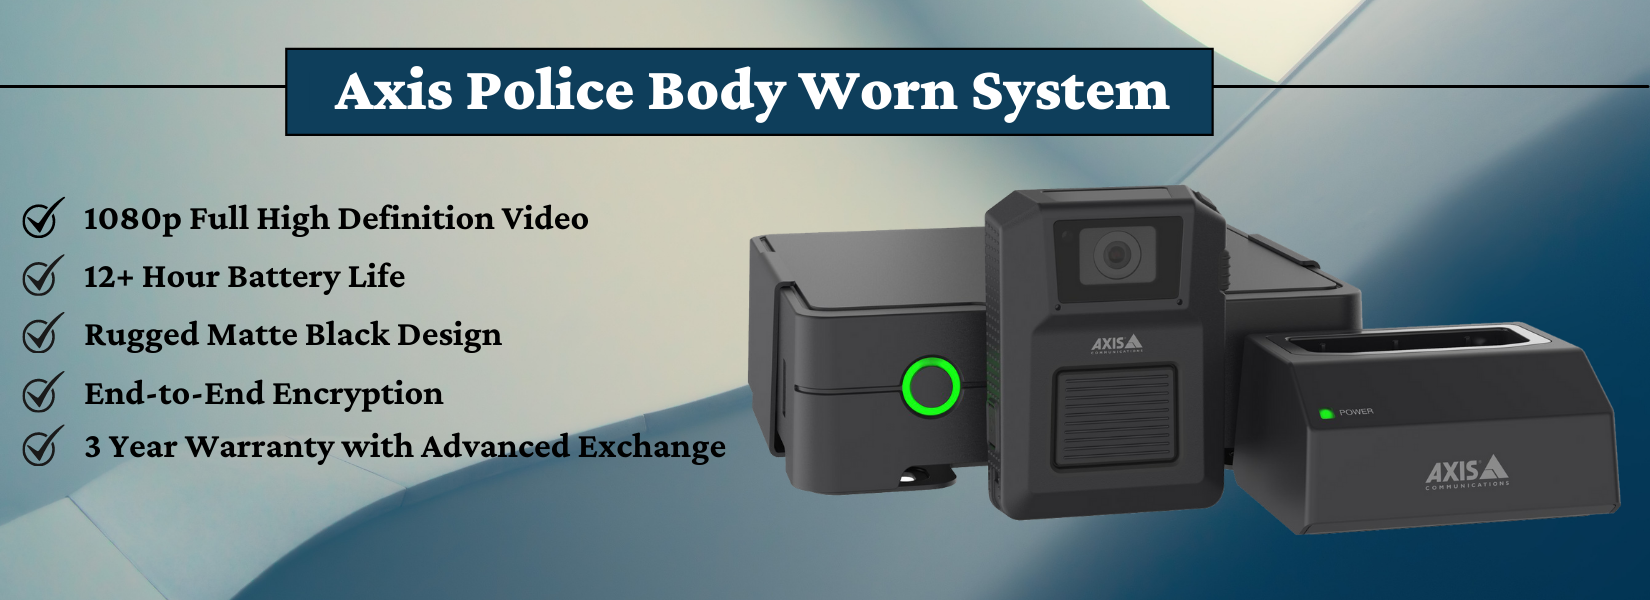 Axis Police Body Worn Camera Information